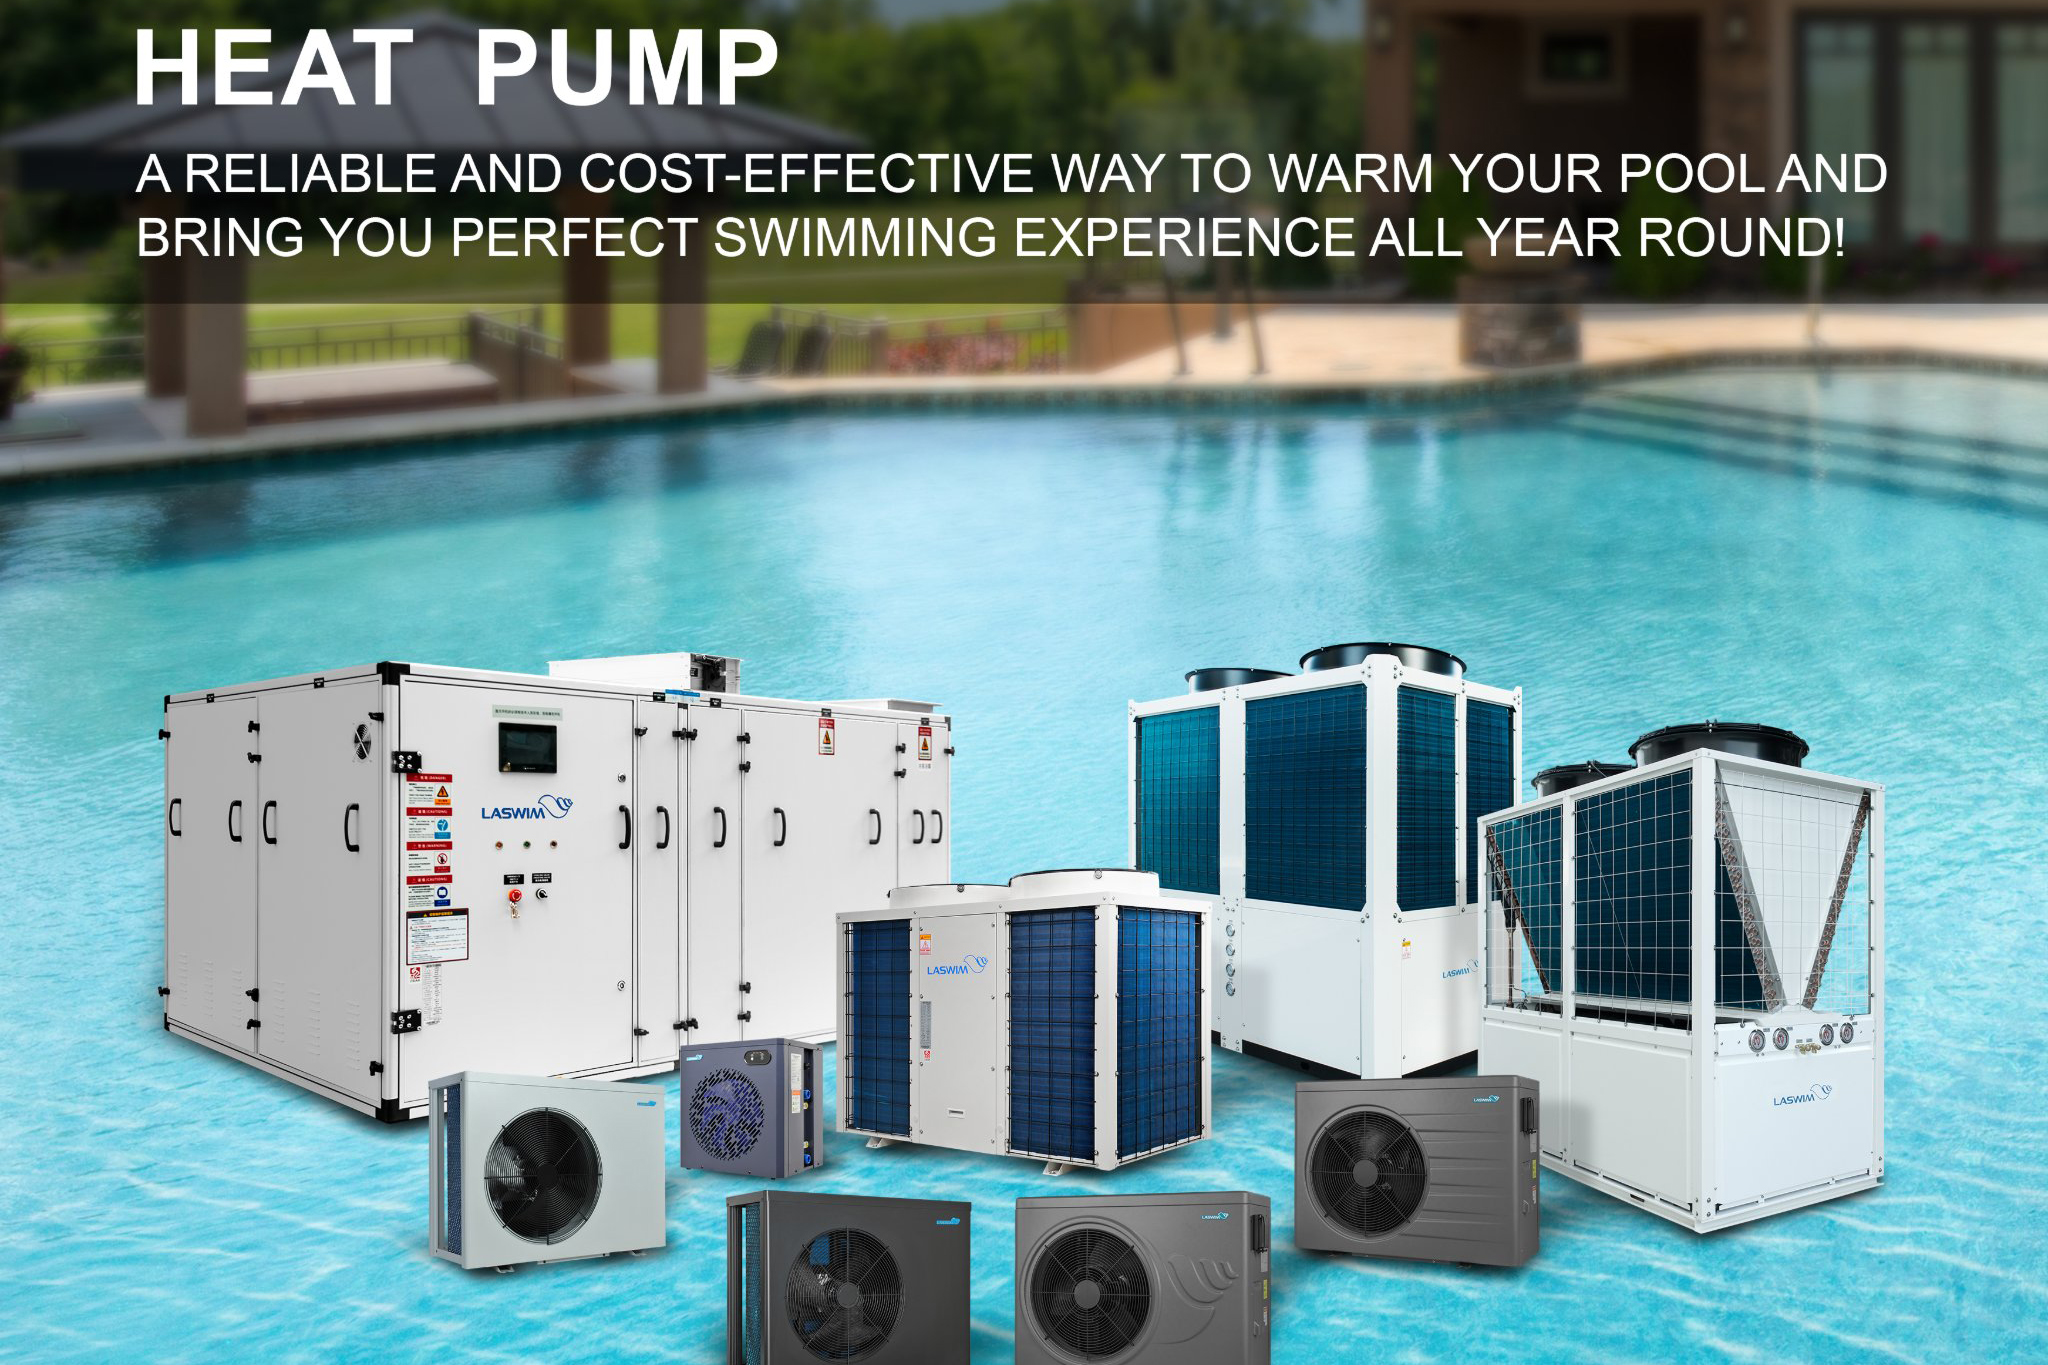 HEAT PUMPS FOR SWIMMING POOL 